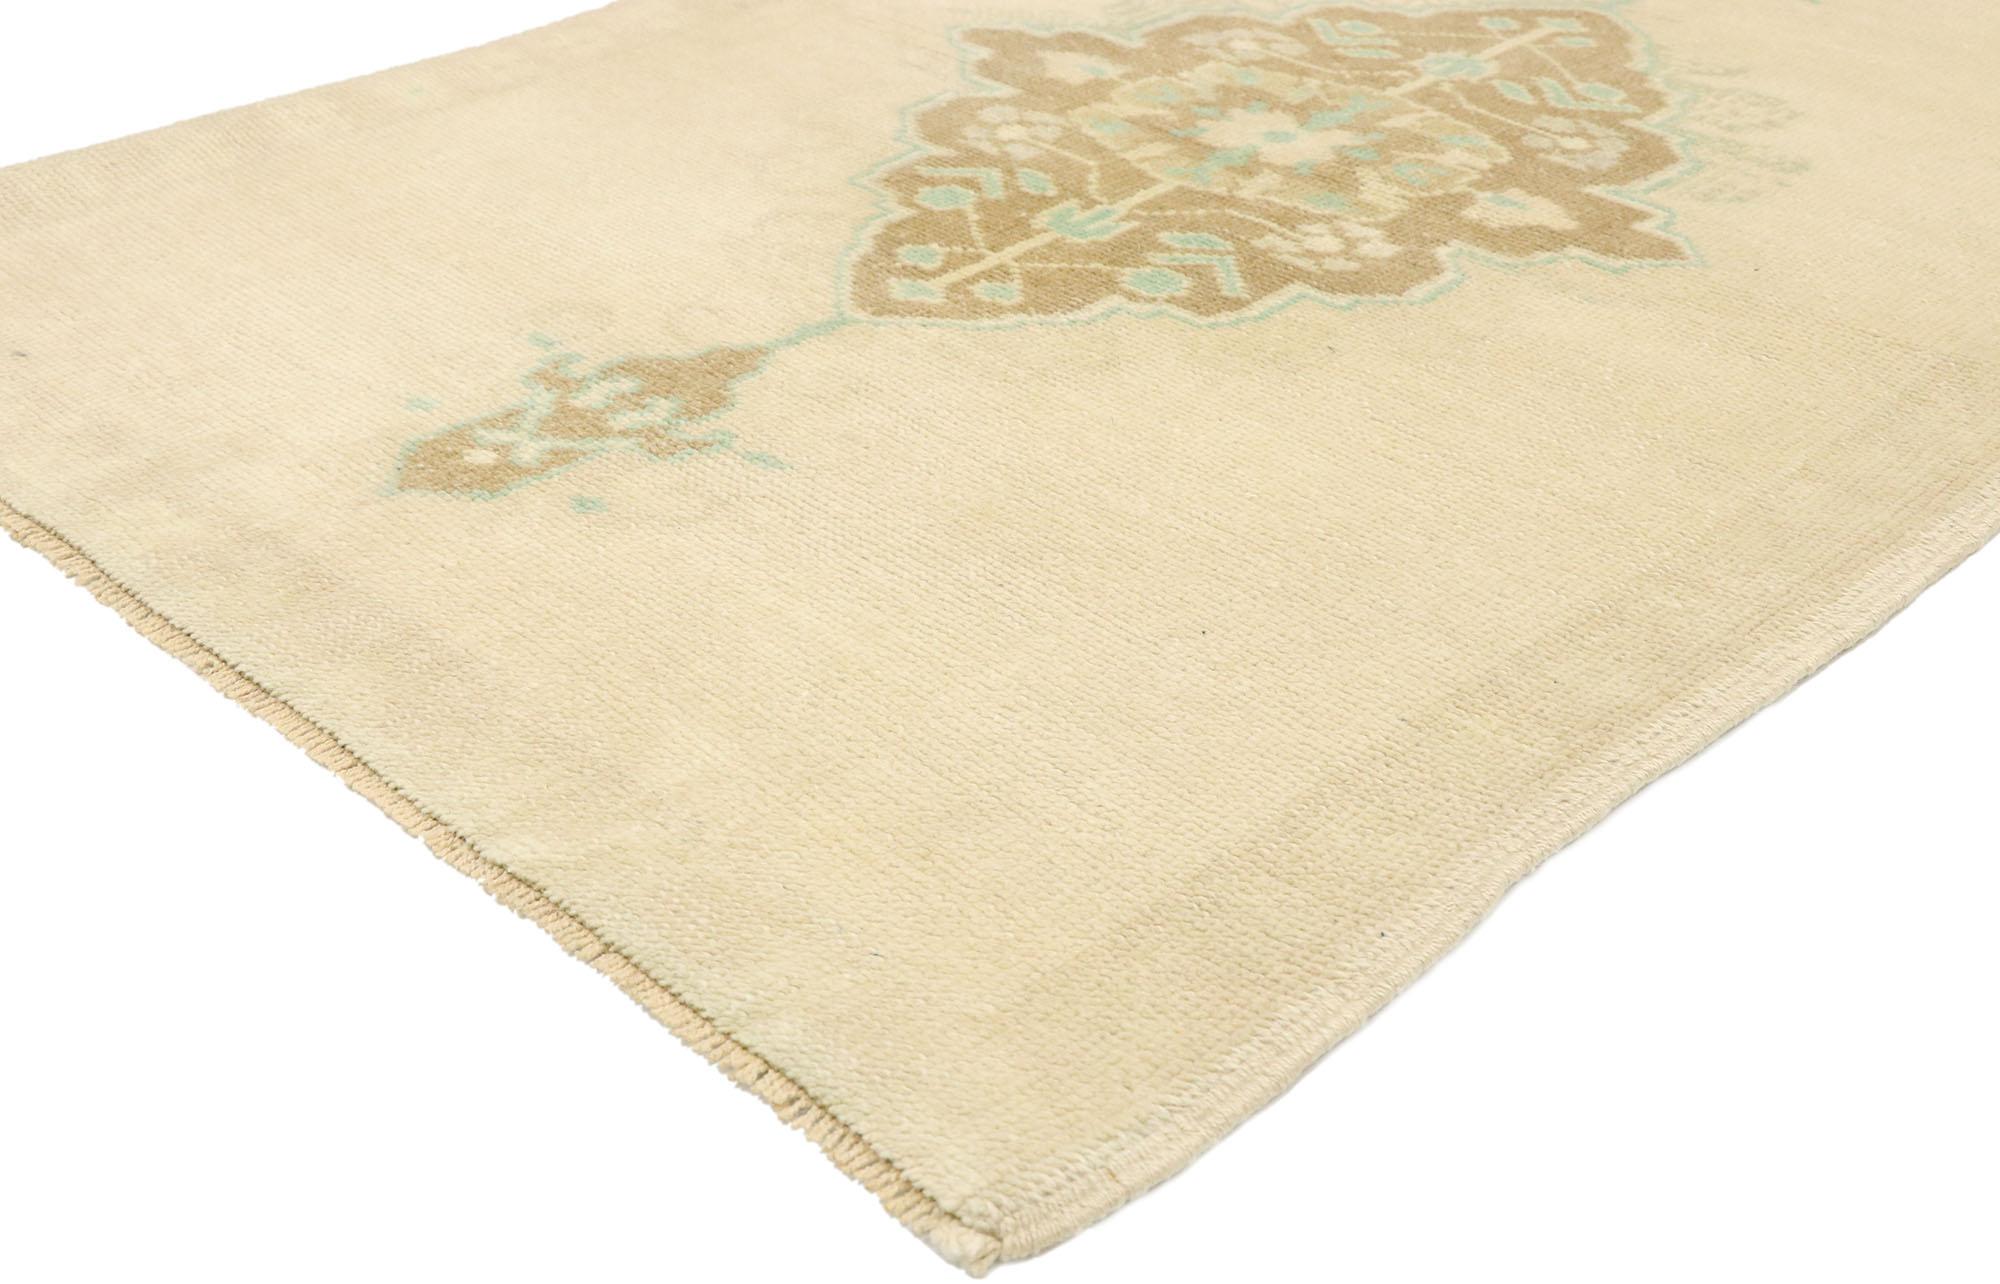 52982, vintage Turkish Oushak rug with Romantic Georgian cottage French style. Romantic Georgian French cottage style meets soft, bespoke vibes in this hand knotted wool vintage Turkish Oushak rug. The open sandy-beige antique washed field